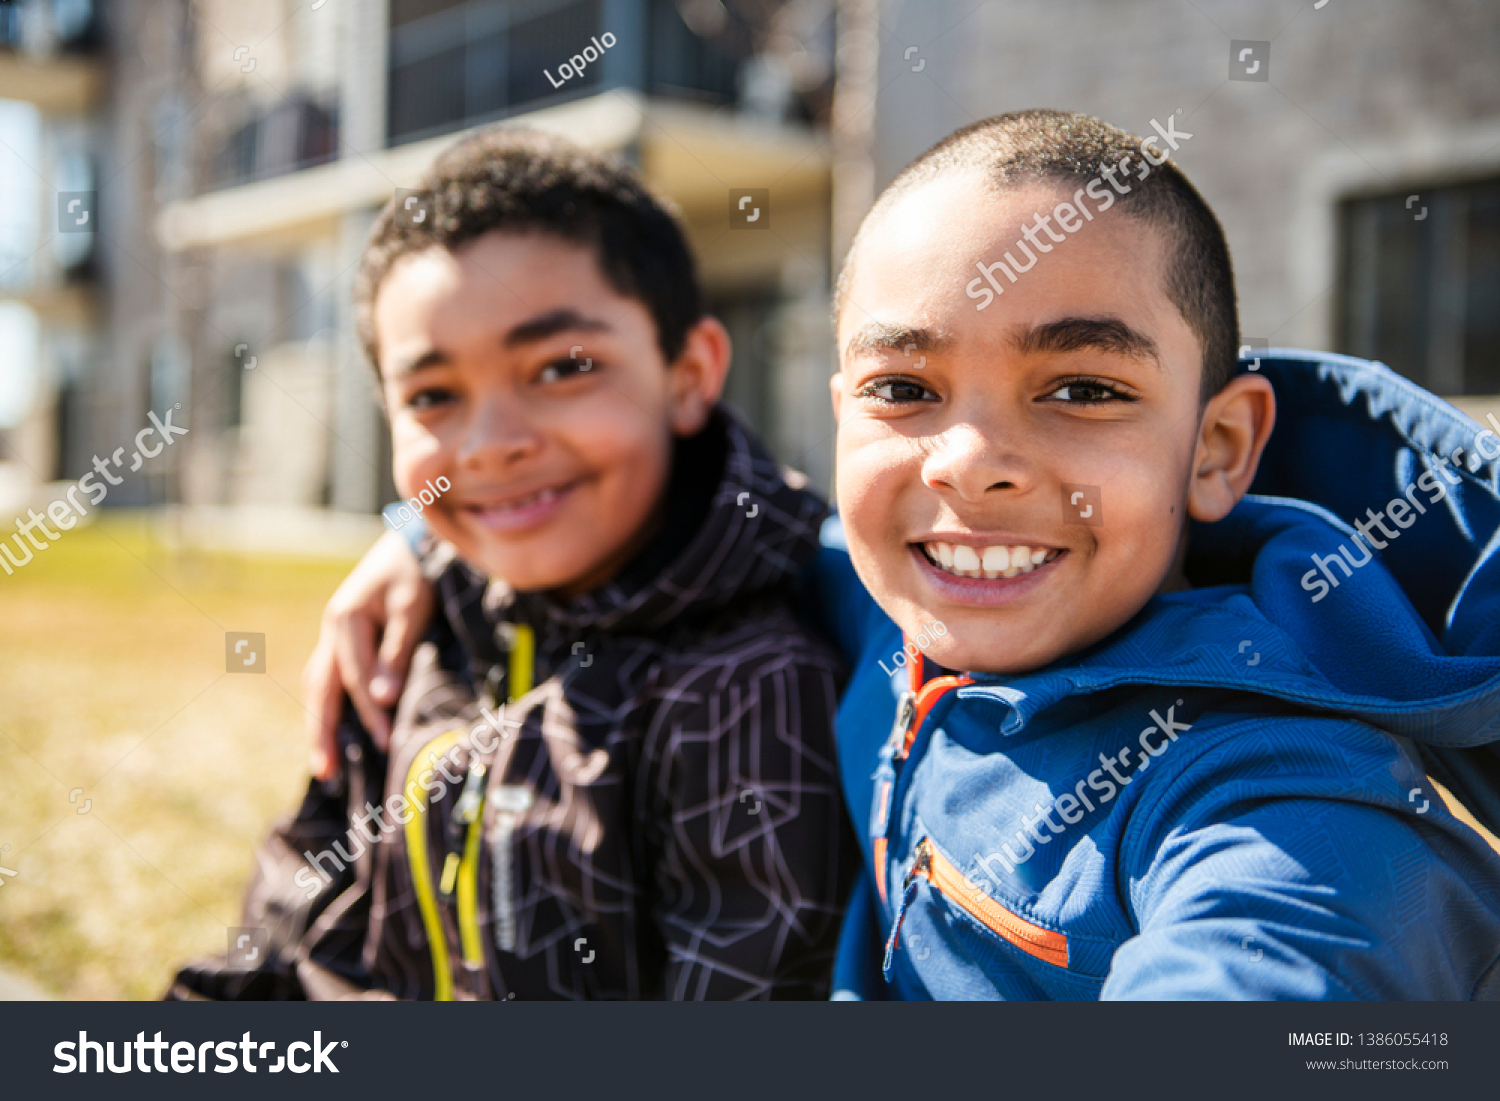 The Children Smiling outside in spring season with coat #1386055418